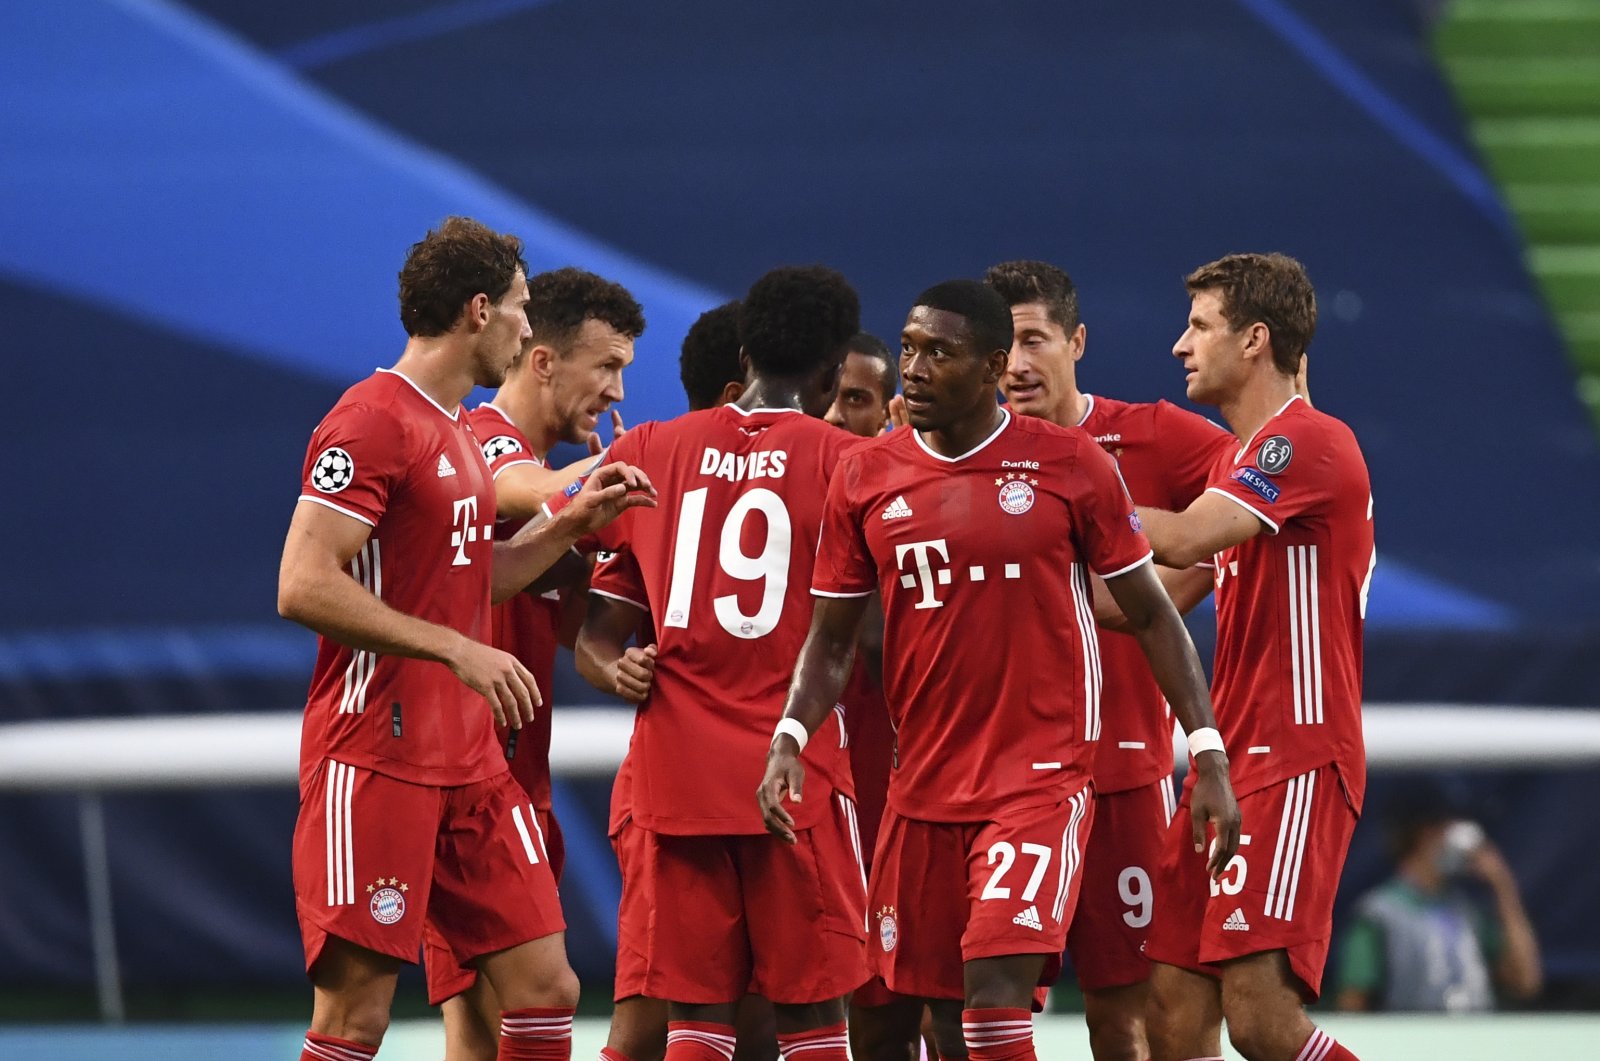 Bayern players celebrate their side's opening goal against Lyon during the Champions League semifinal at the Jose Alvalade stadium in Lisbon, Portugal, Aug. 19, 2020. (AP Photo)